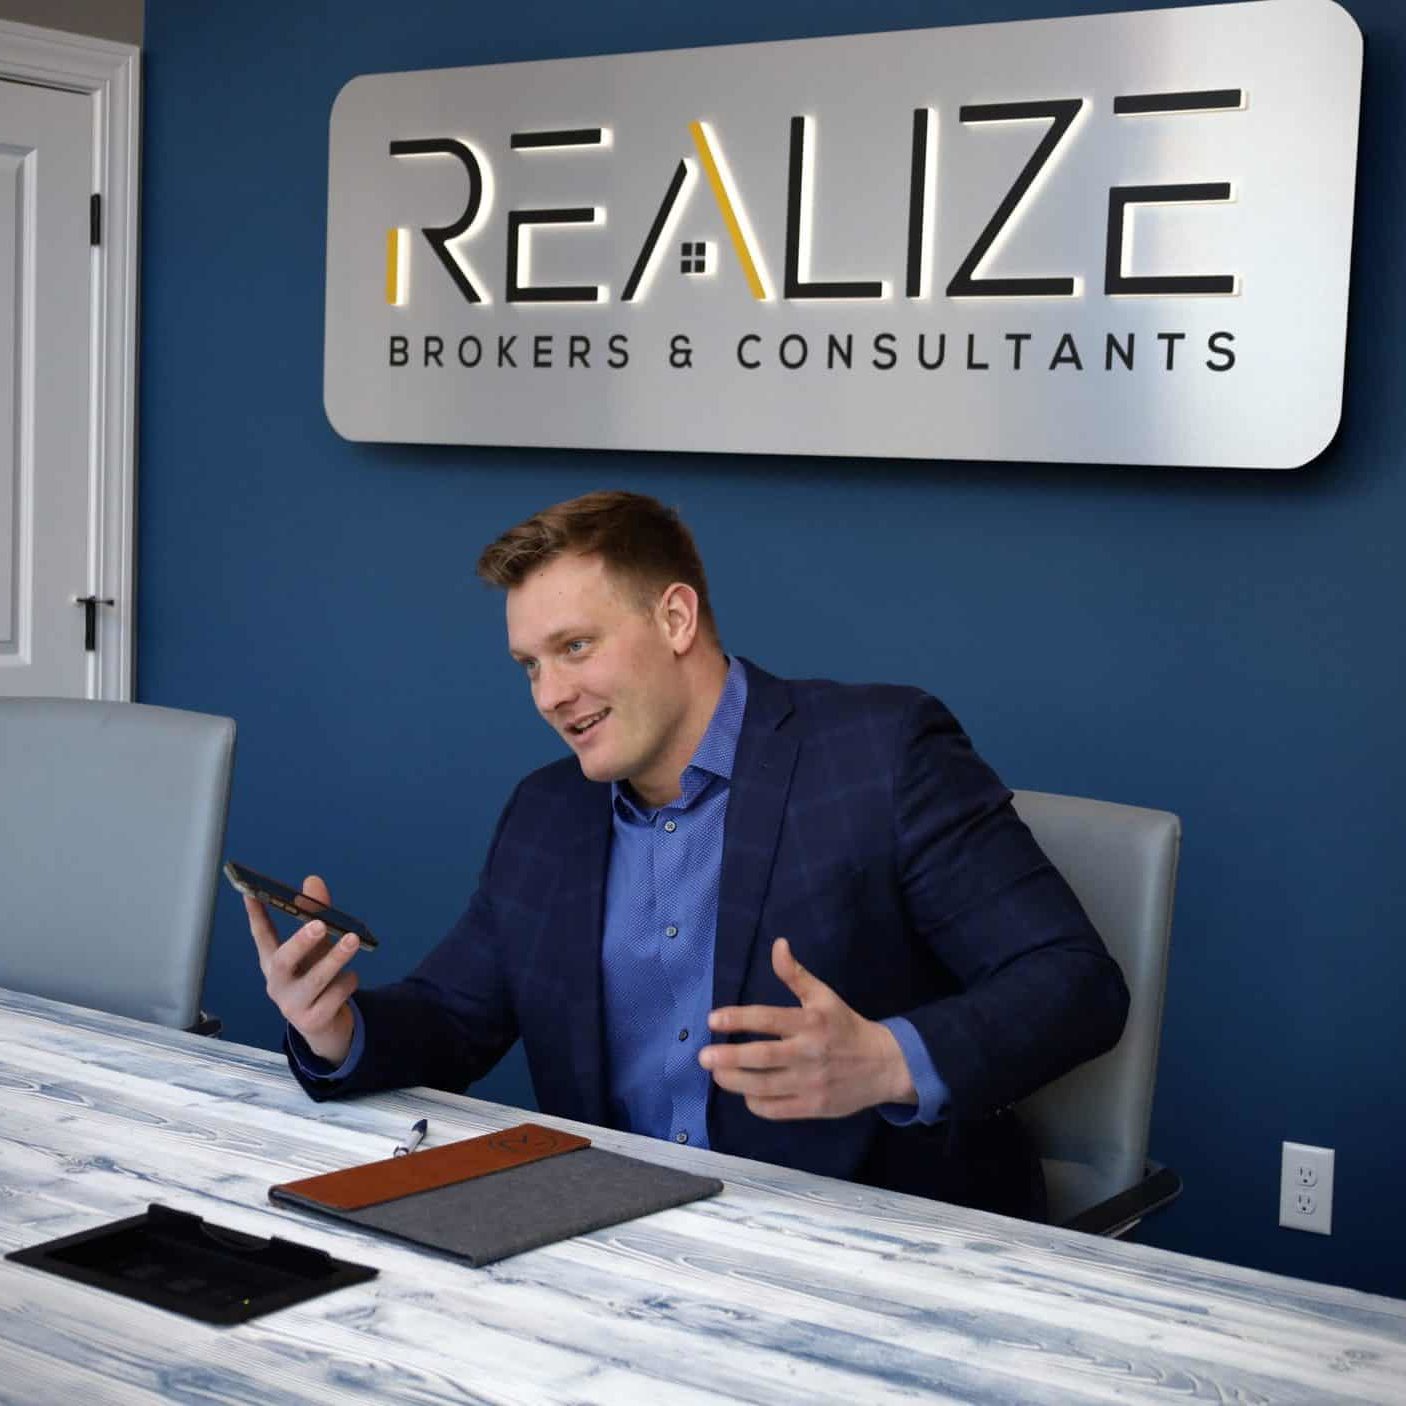 Realize Brokers Real Estate